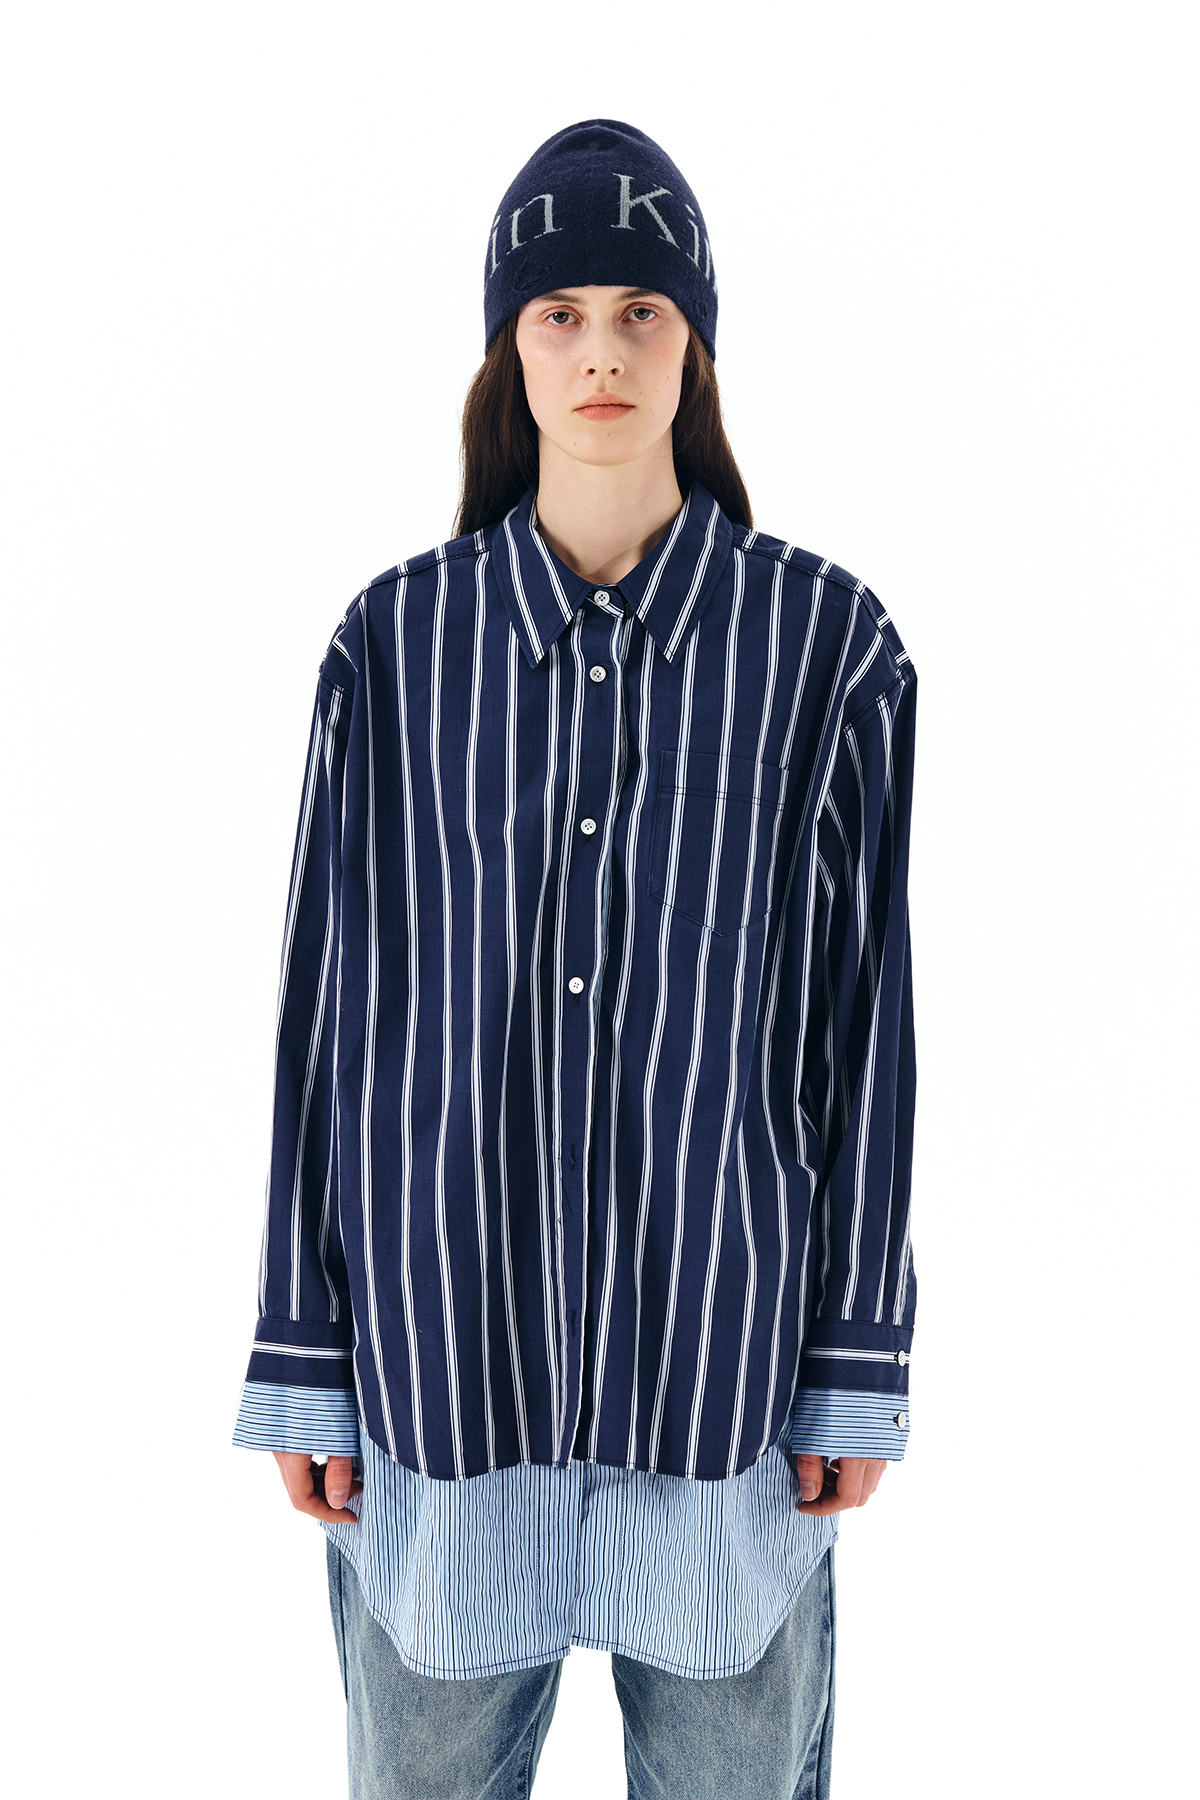 DOUBLE LAYERS STRIPE SHIRT IN NAVY